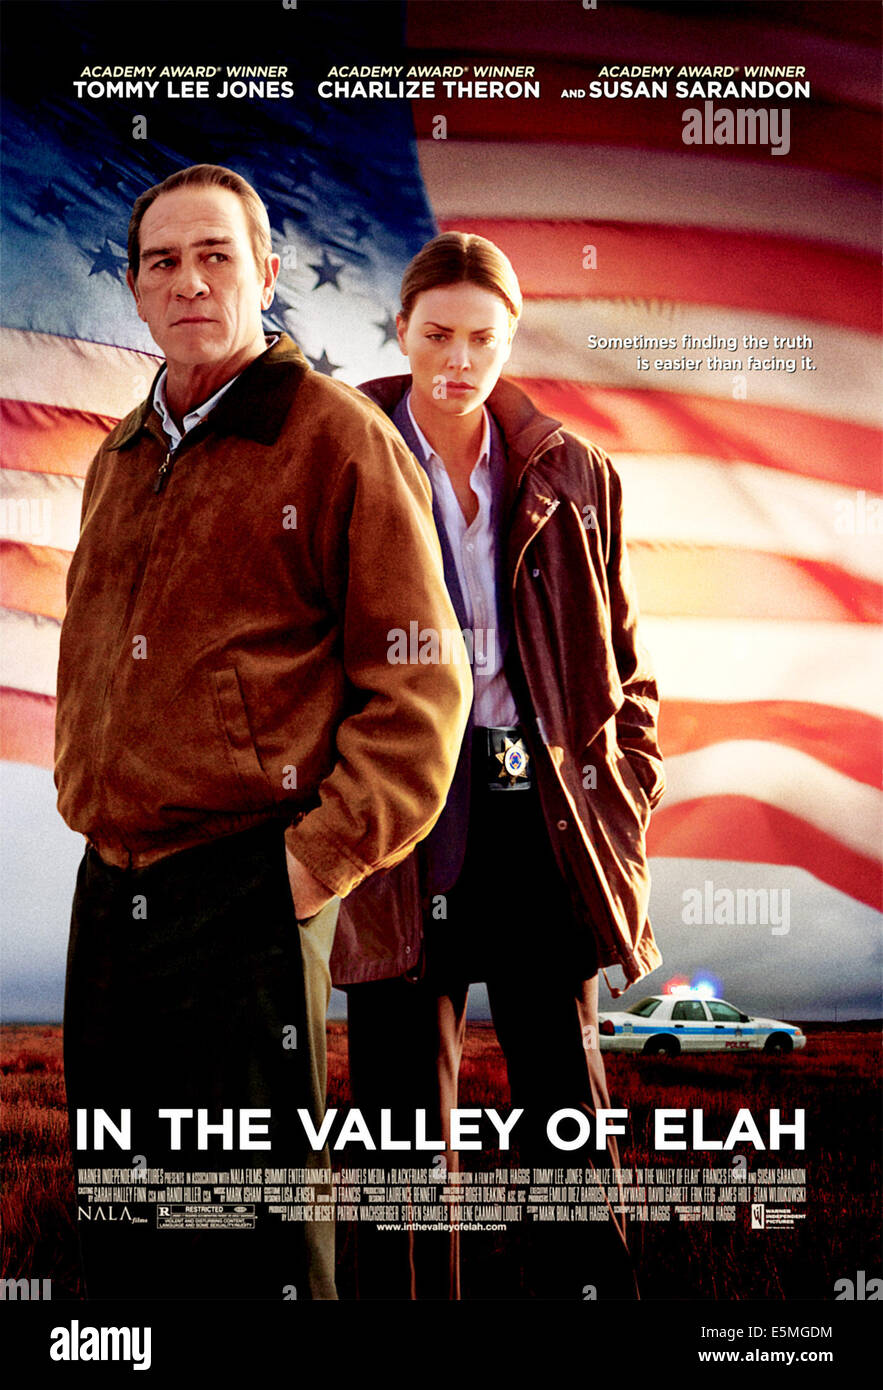 In The Valley Of Elah Movie Poster